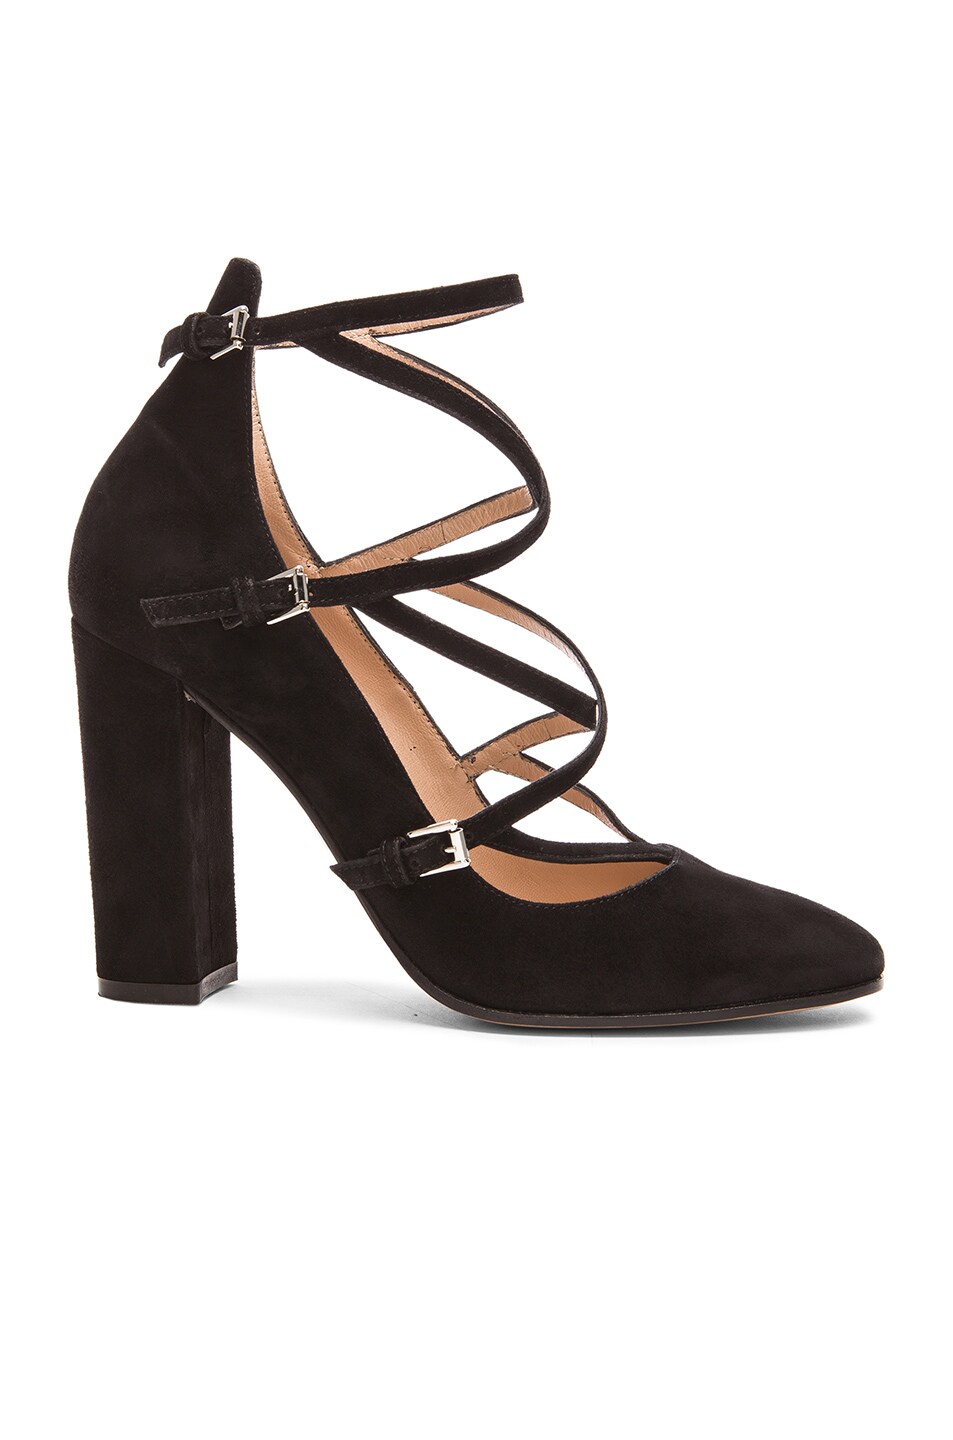 Image 1 of Gianvito Rossi Suede Strappy Crisscross Pumps in Black Suede